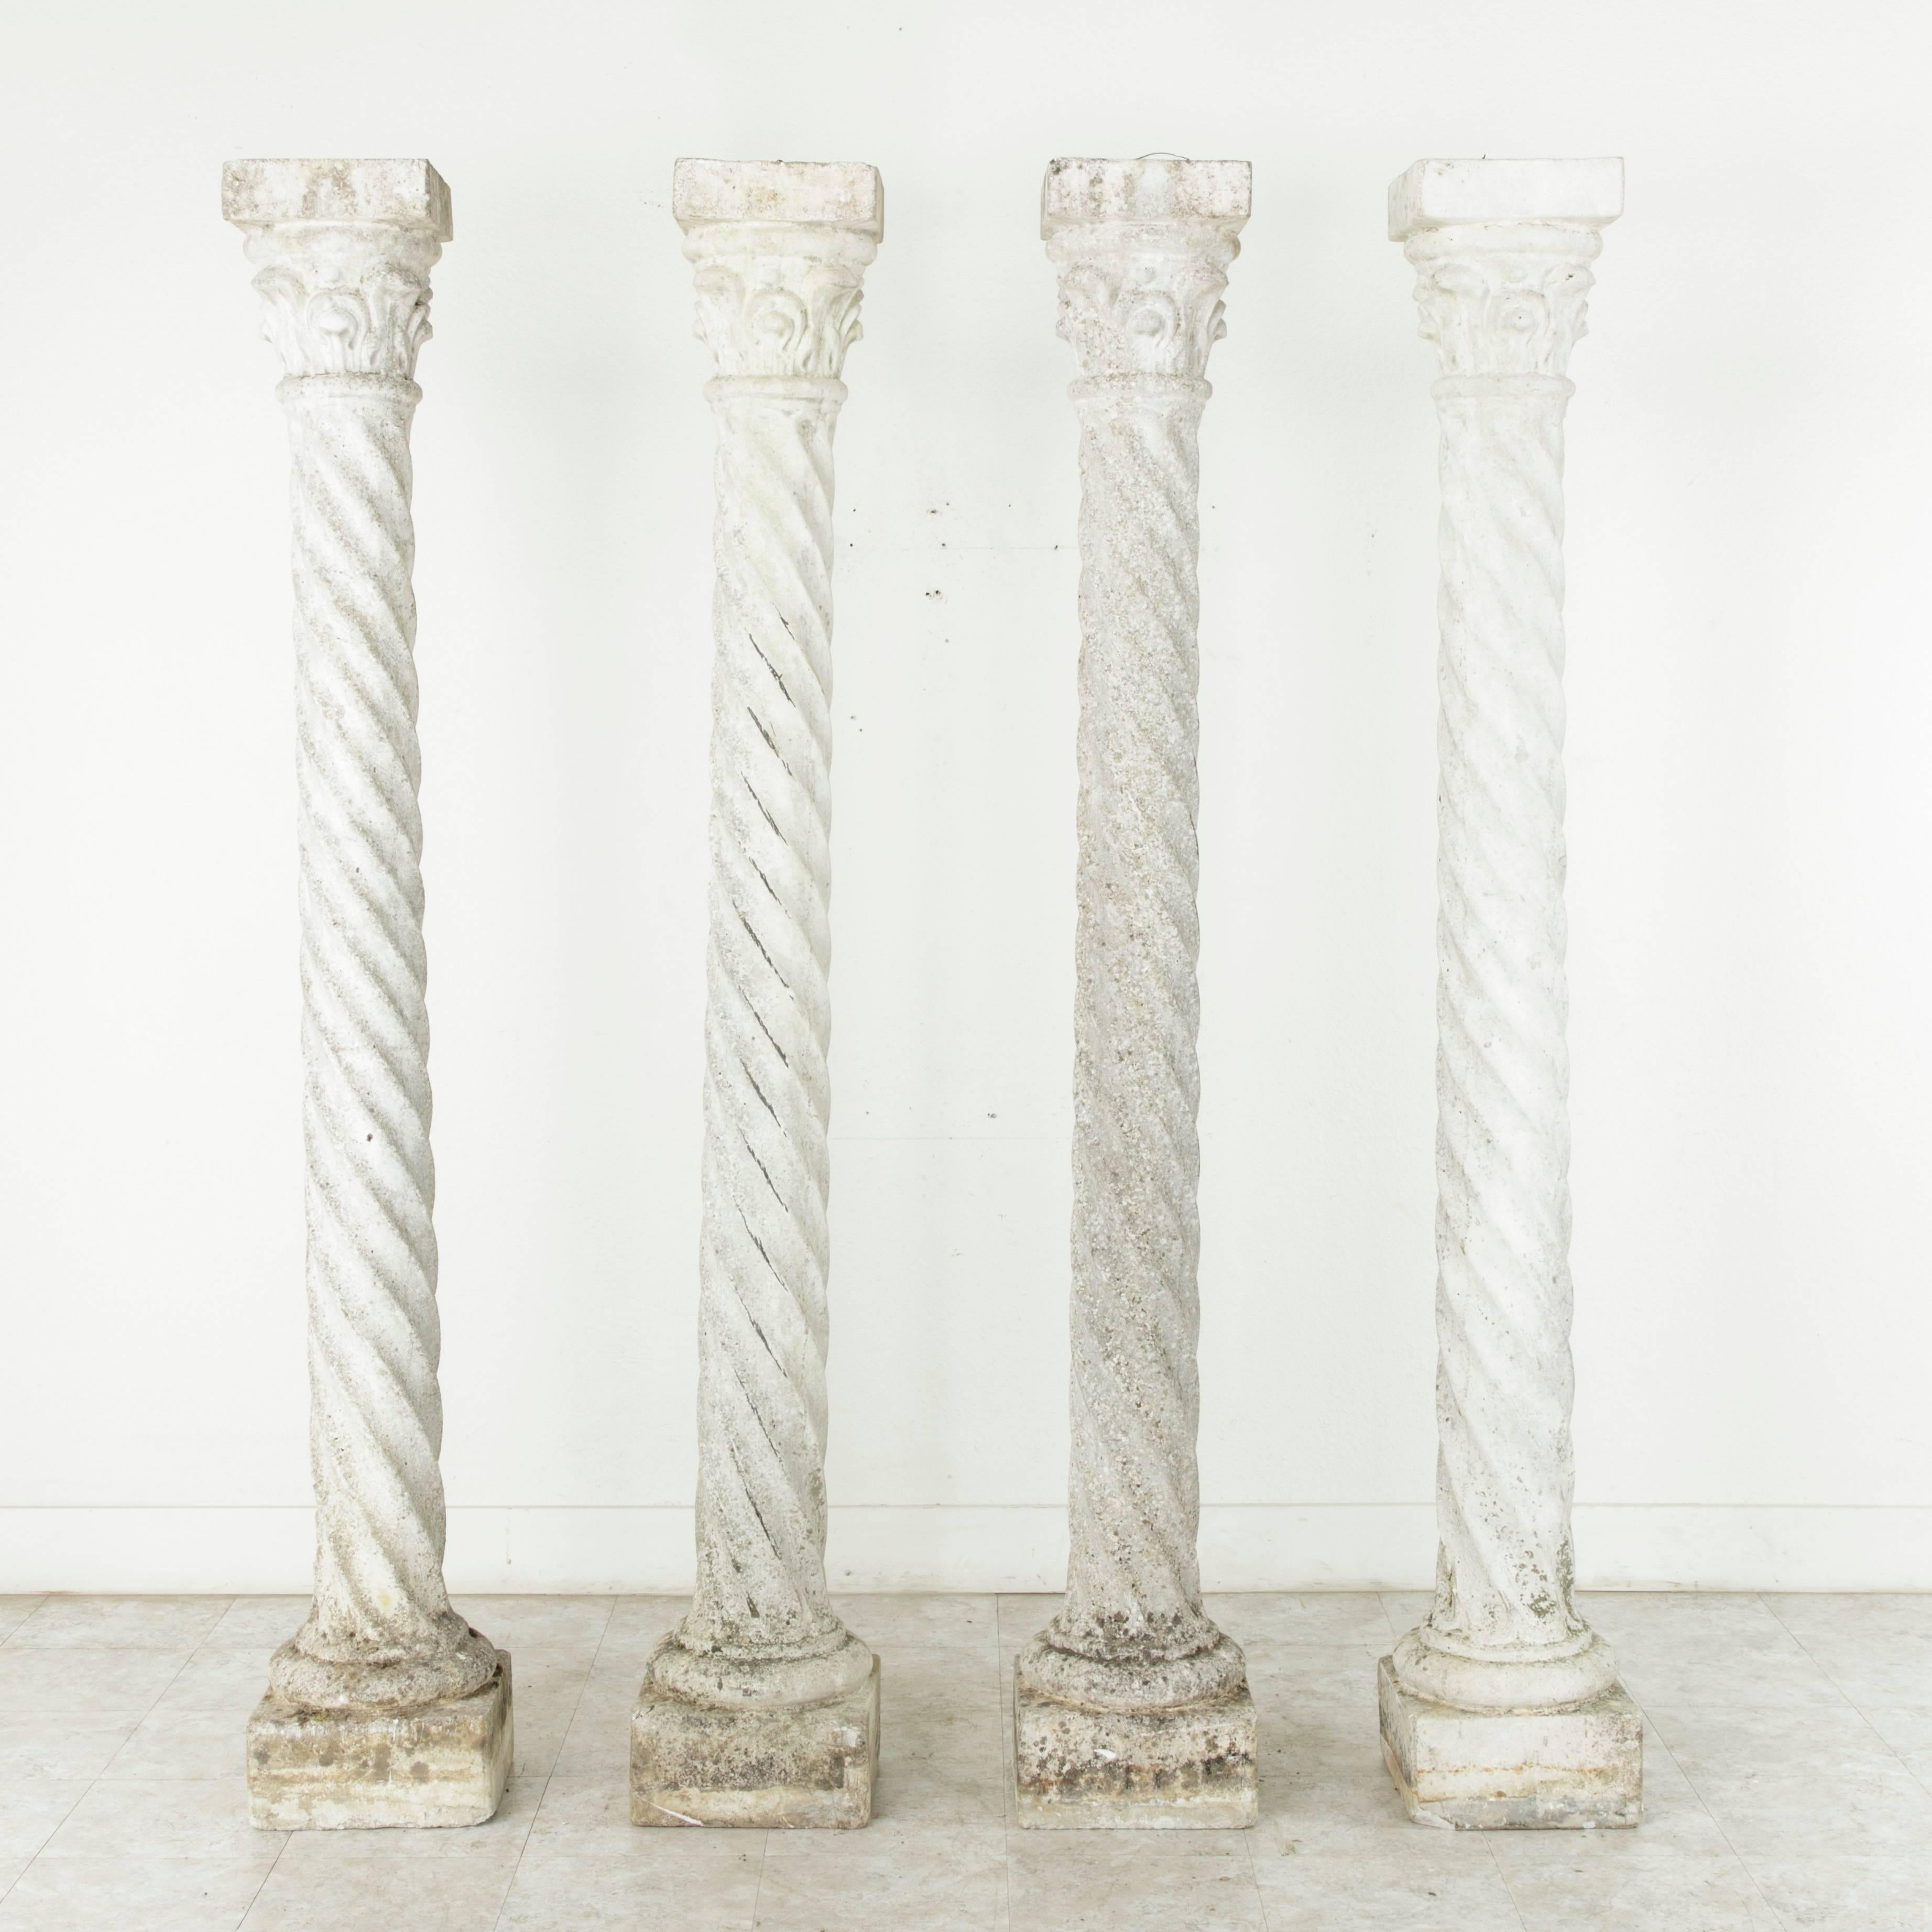 Four Cast Stone Columns or Pillars from Normandy, France, Seven Feet Tall 5